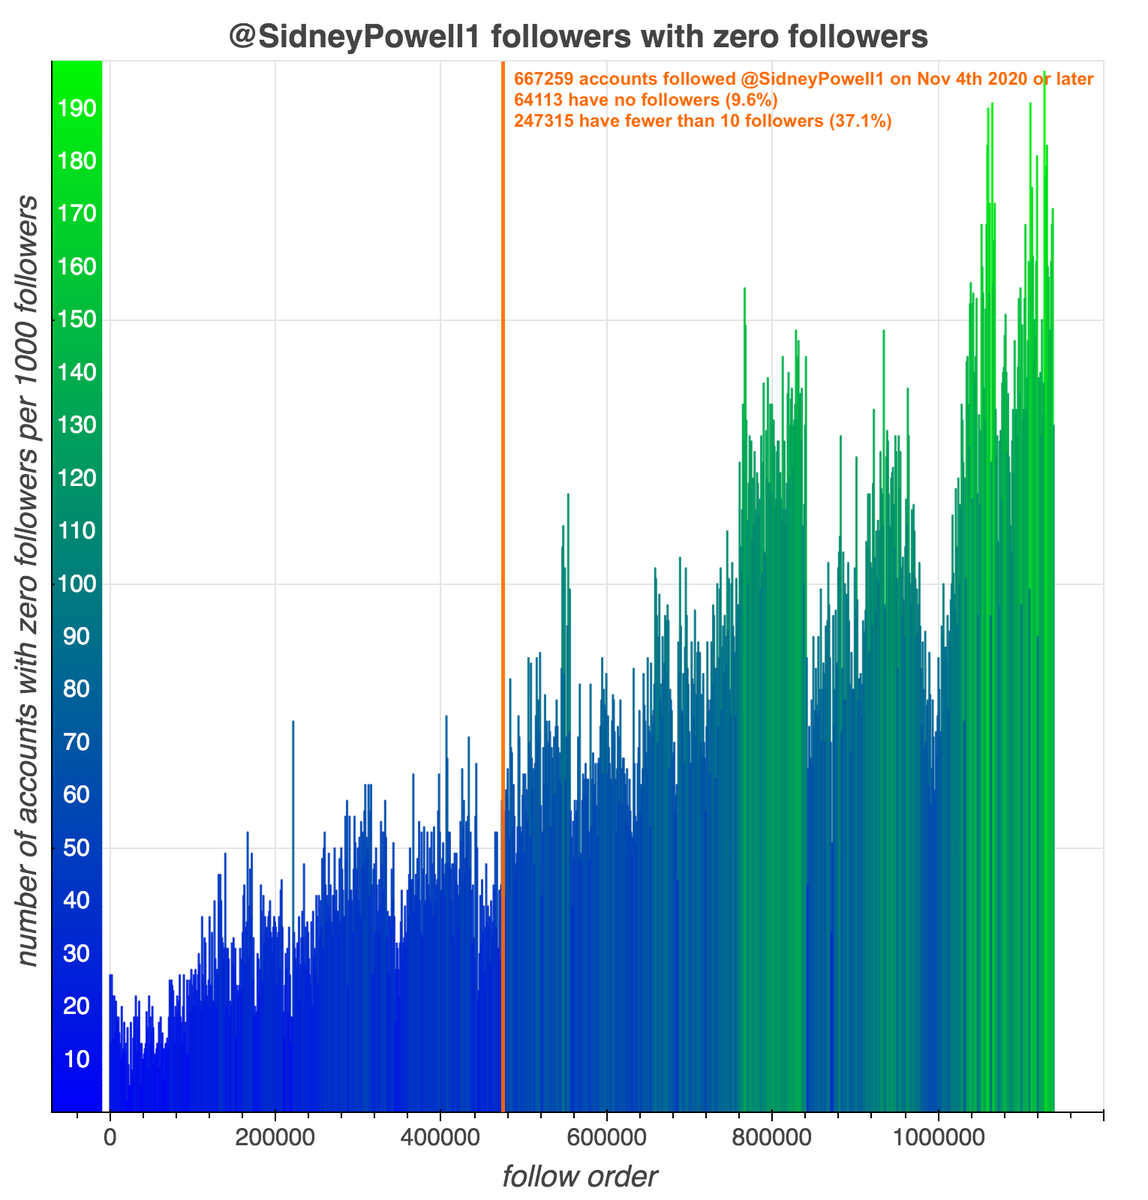 Fast-forward to  @SidneyPowell1's recent followers, where there are a couple other things to see. The proportion of her followers since the election with few or no tweets or followers has trended sharply upward, especially since the election.